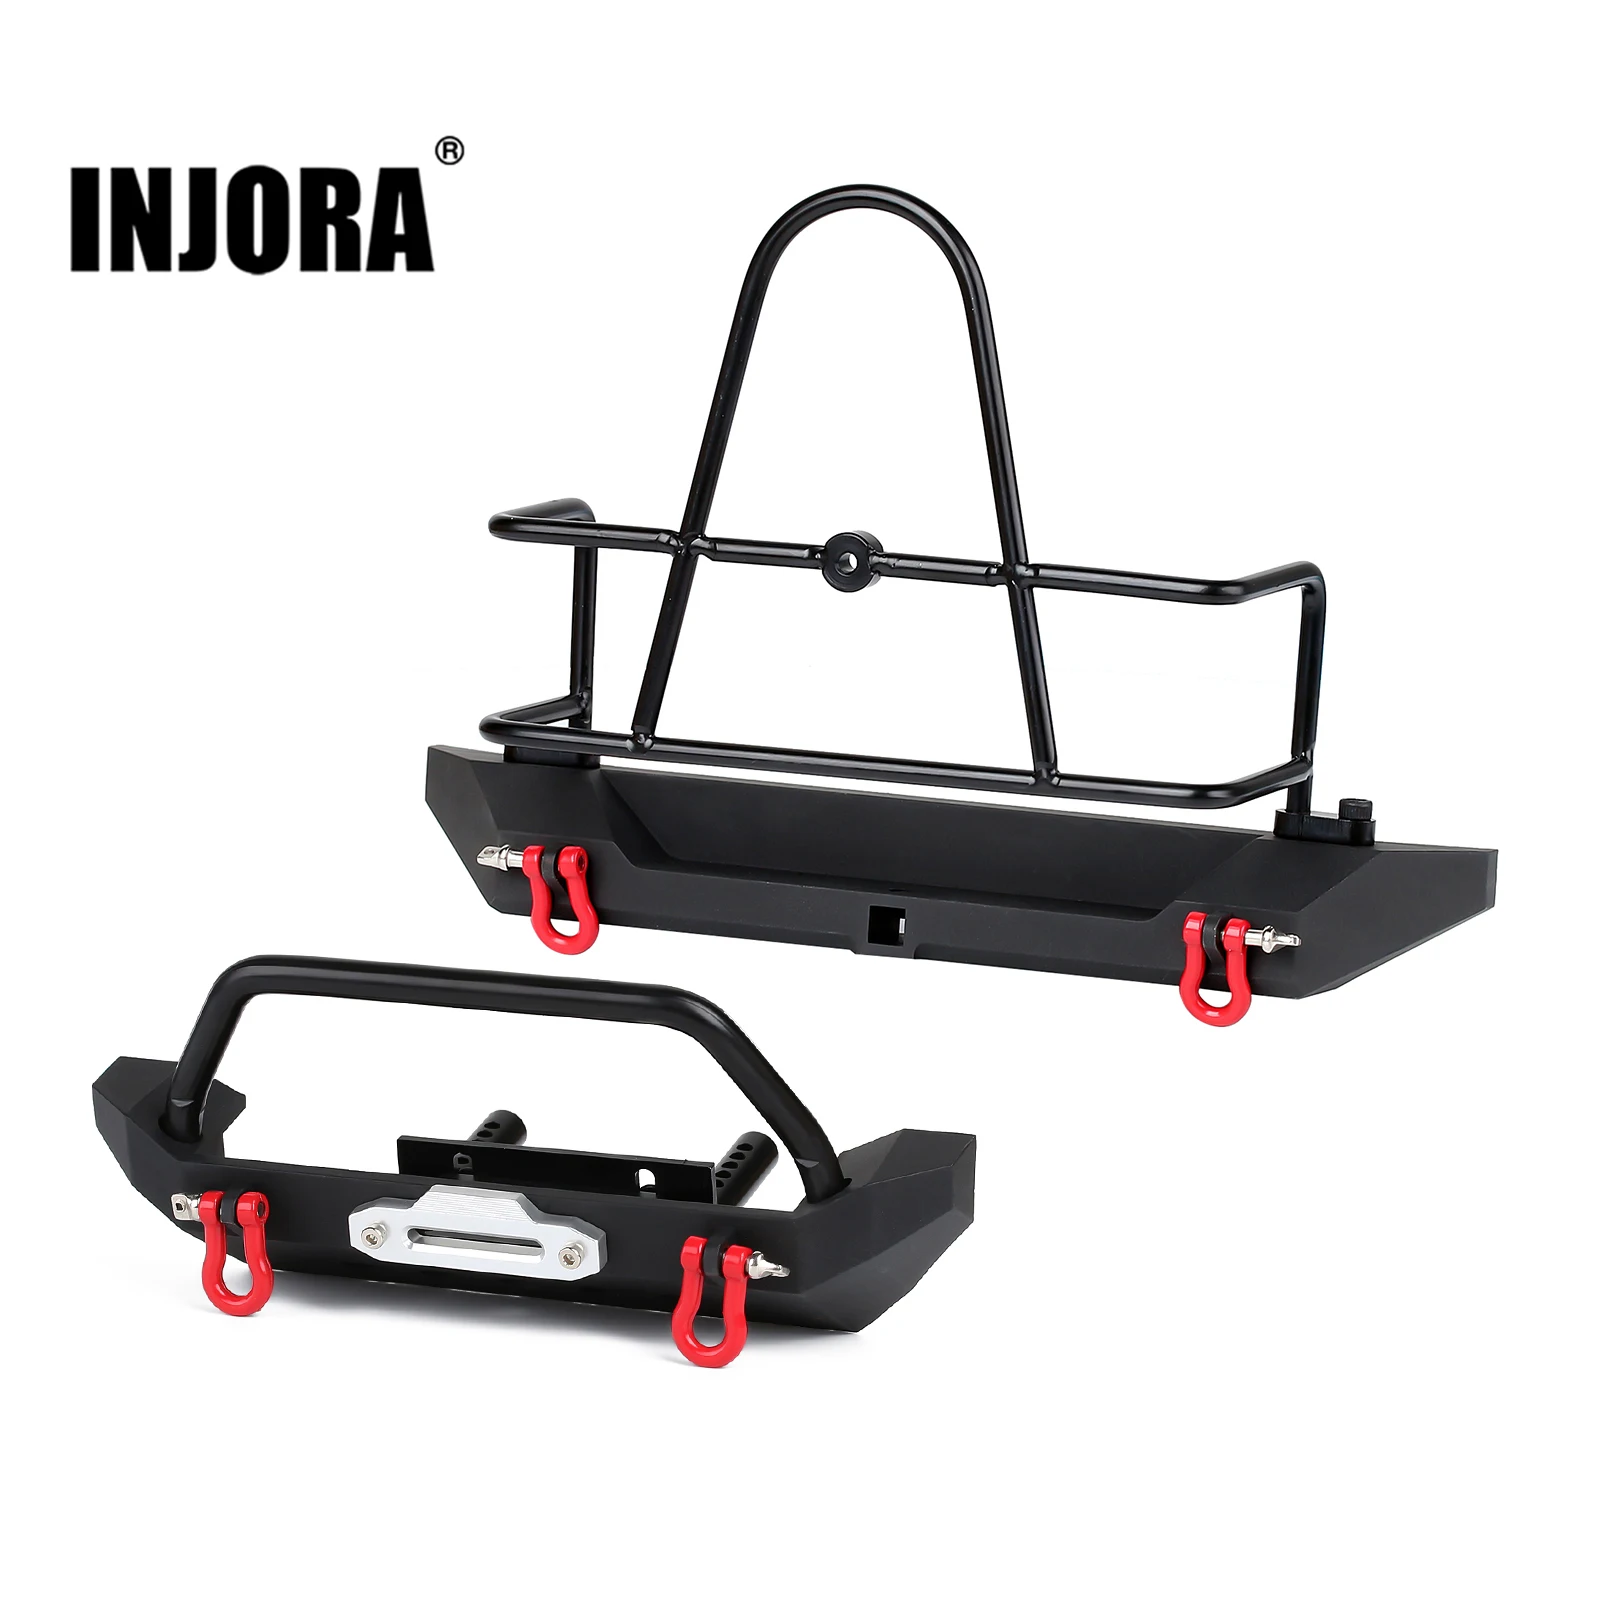 INJORA Metal Front Rear Bumper with Tow Hook for 1/10 RC Crawler Axial SCX10 90046 SCX10 III AXI03007 Upgrade Parts